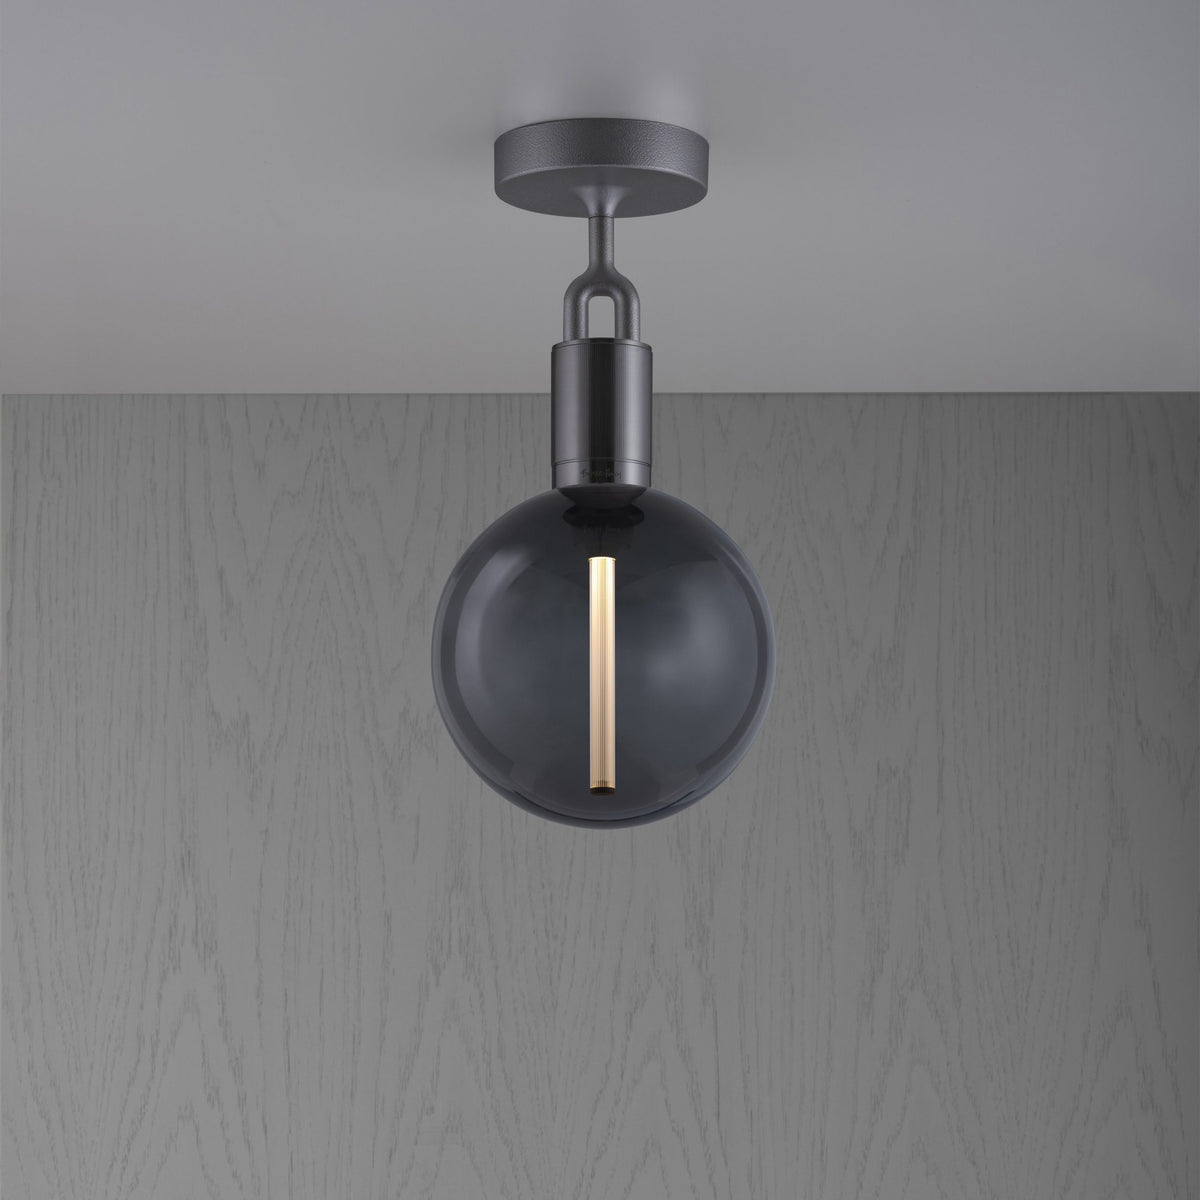 Buster + Punch - NFC-883234 - Forked Ceiling - Globe  - Forked - Gun Metal